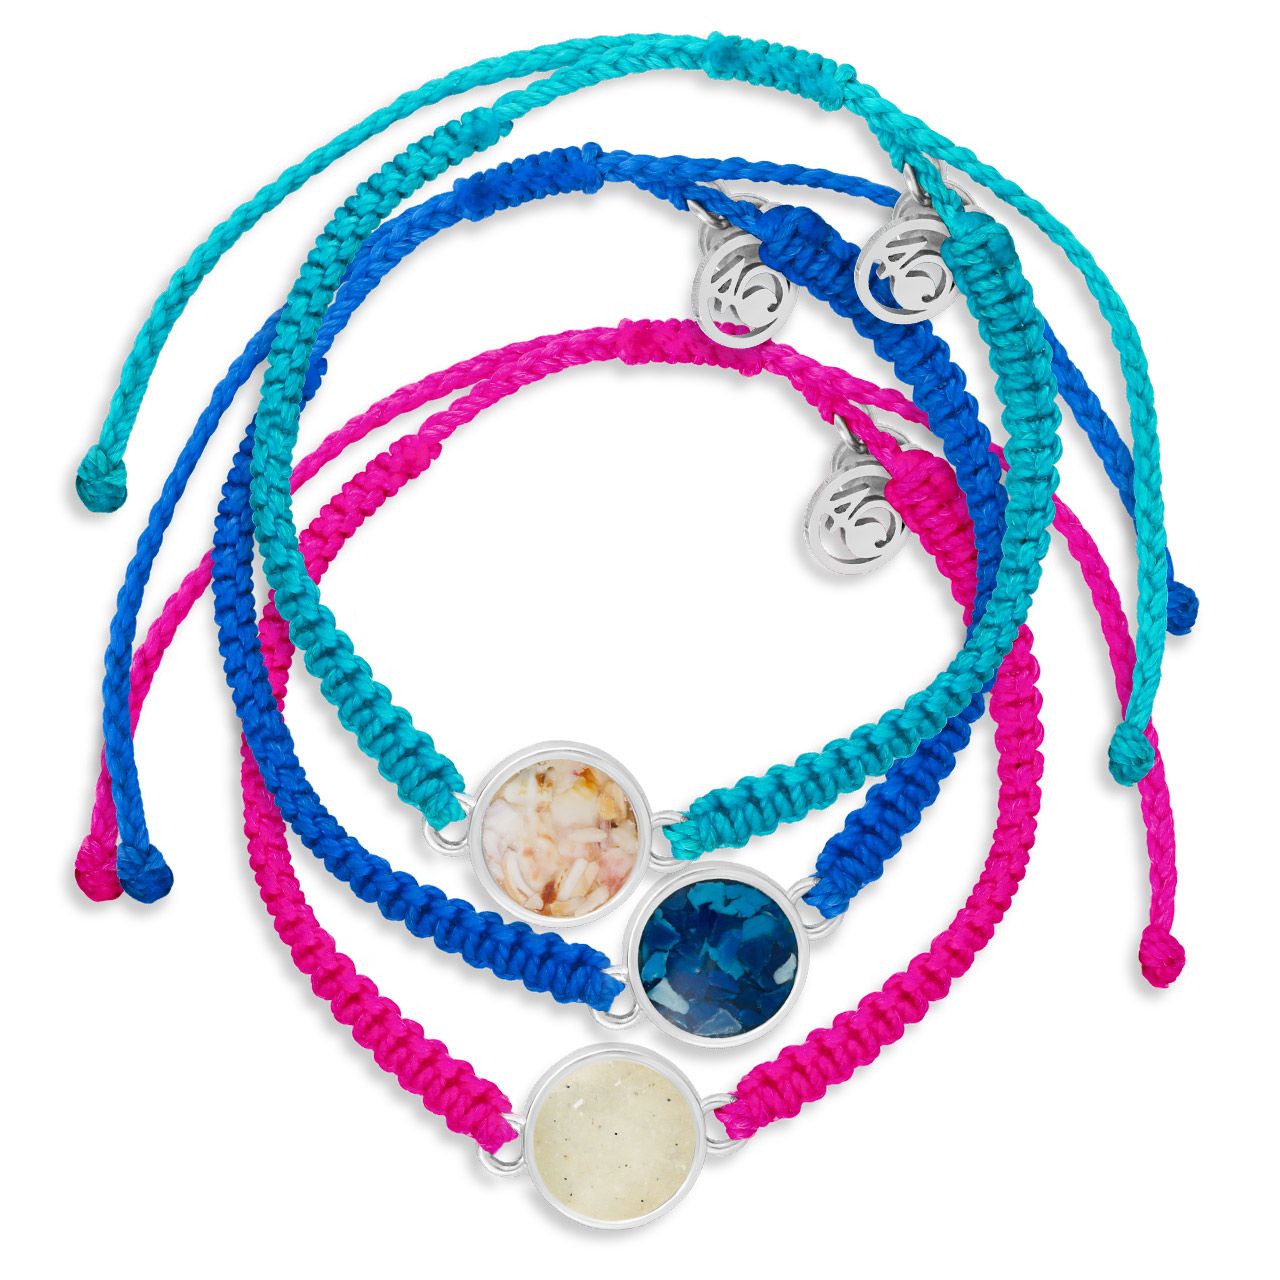 Product shot of the Dune x 4ocean Calypso bracelet set with woven polymer in pink, blue, and teal and recycled plastic-filled circular pendants.